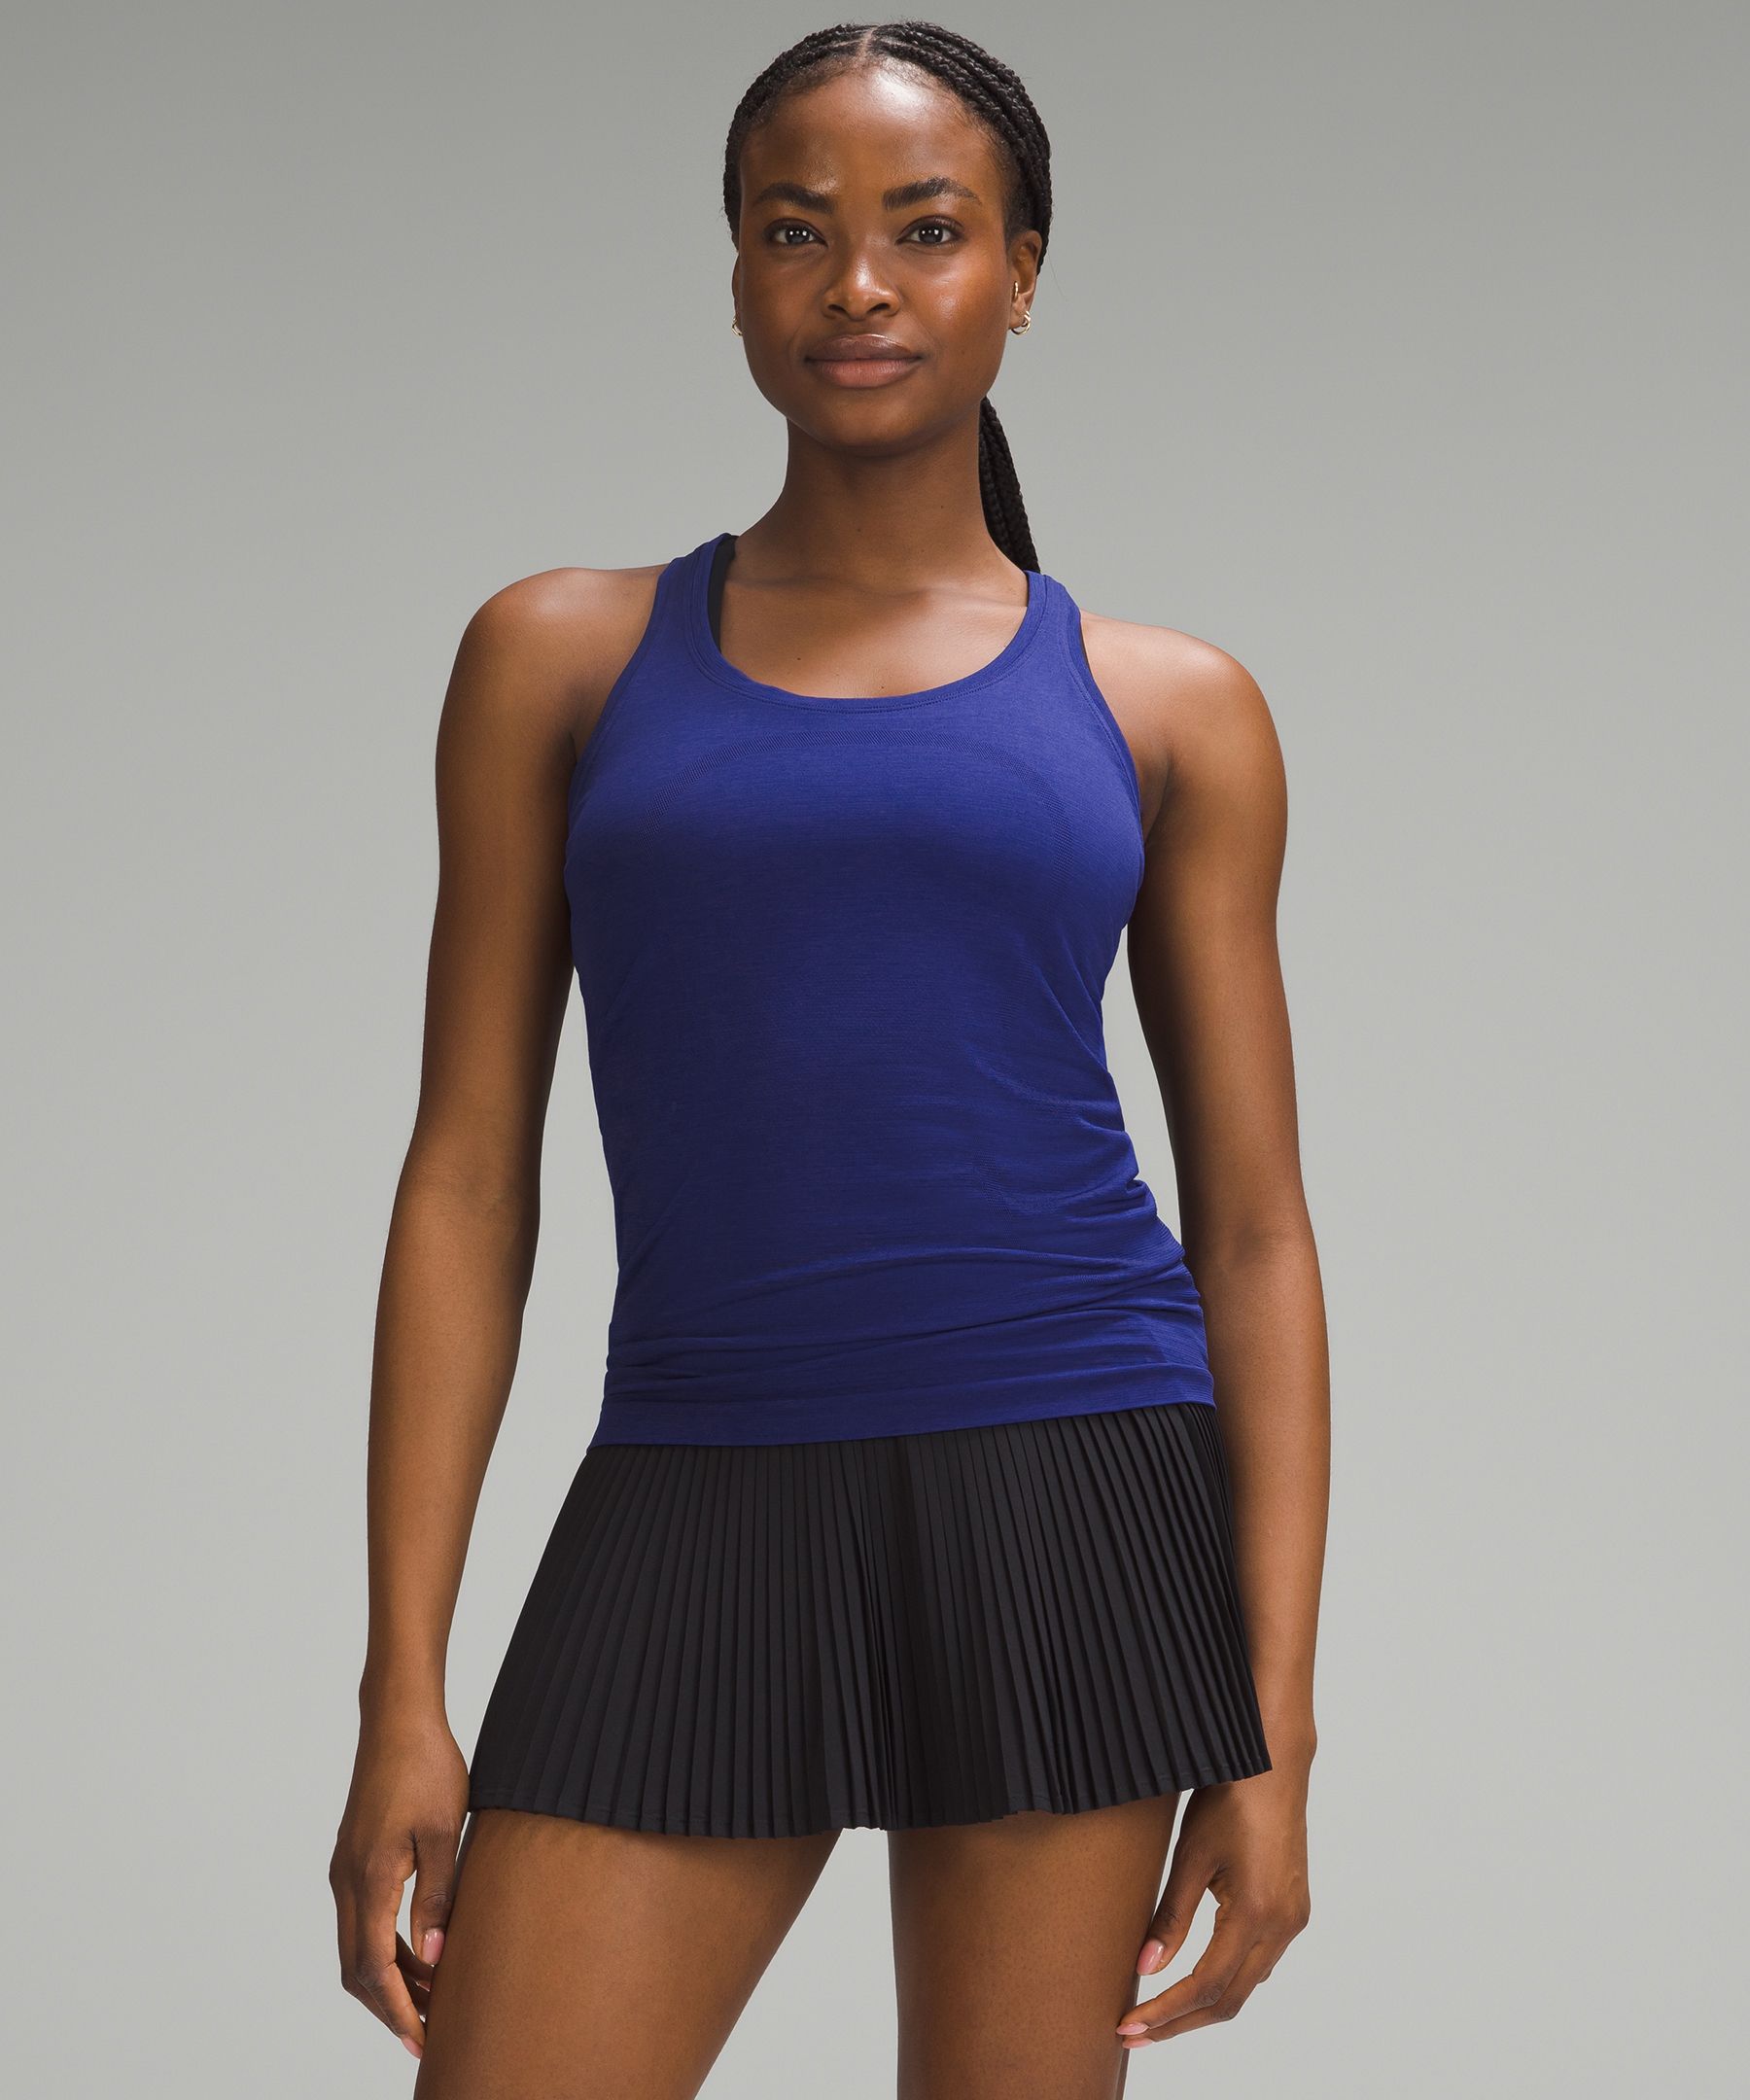 New spotted in store! A Swiftly Racerback Tank *Race in Symphony Blue! : r/ lululemon